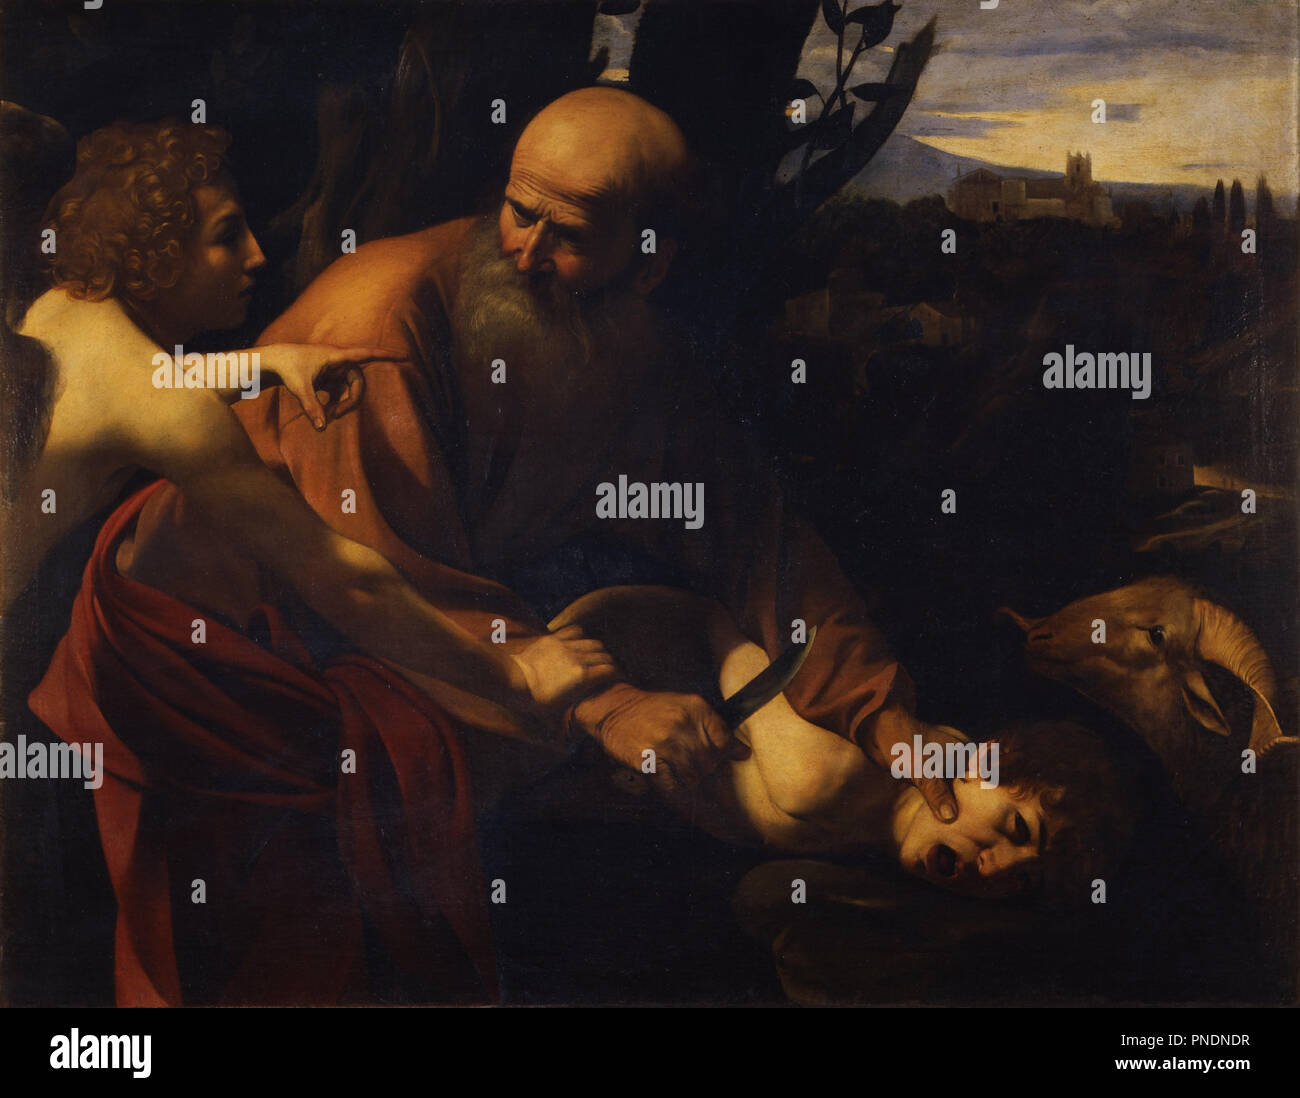 Sacrificio di Isacco / Sacrifice of Isaac. Date/Period: From 1603 until 1604. Painting. Oil on canvas. Height: 104 cm (40.9 in); Width: 135 cm (53.1 in). Author: CARAVAGGIO. Stock Photo